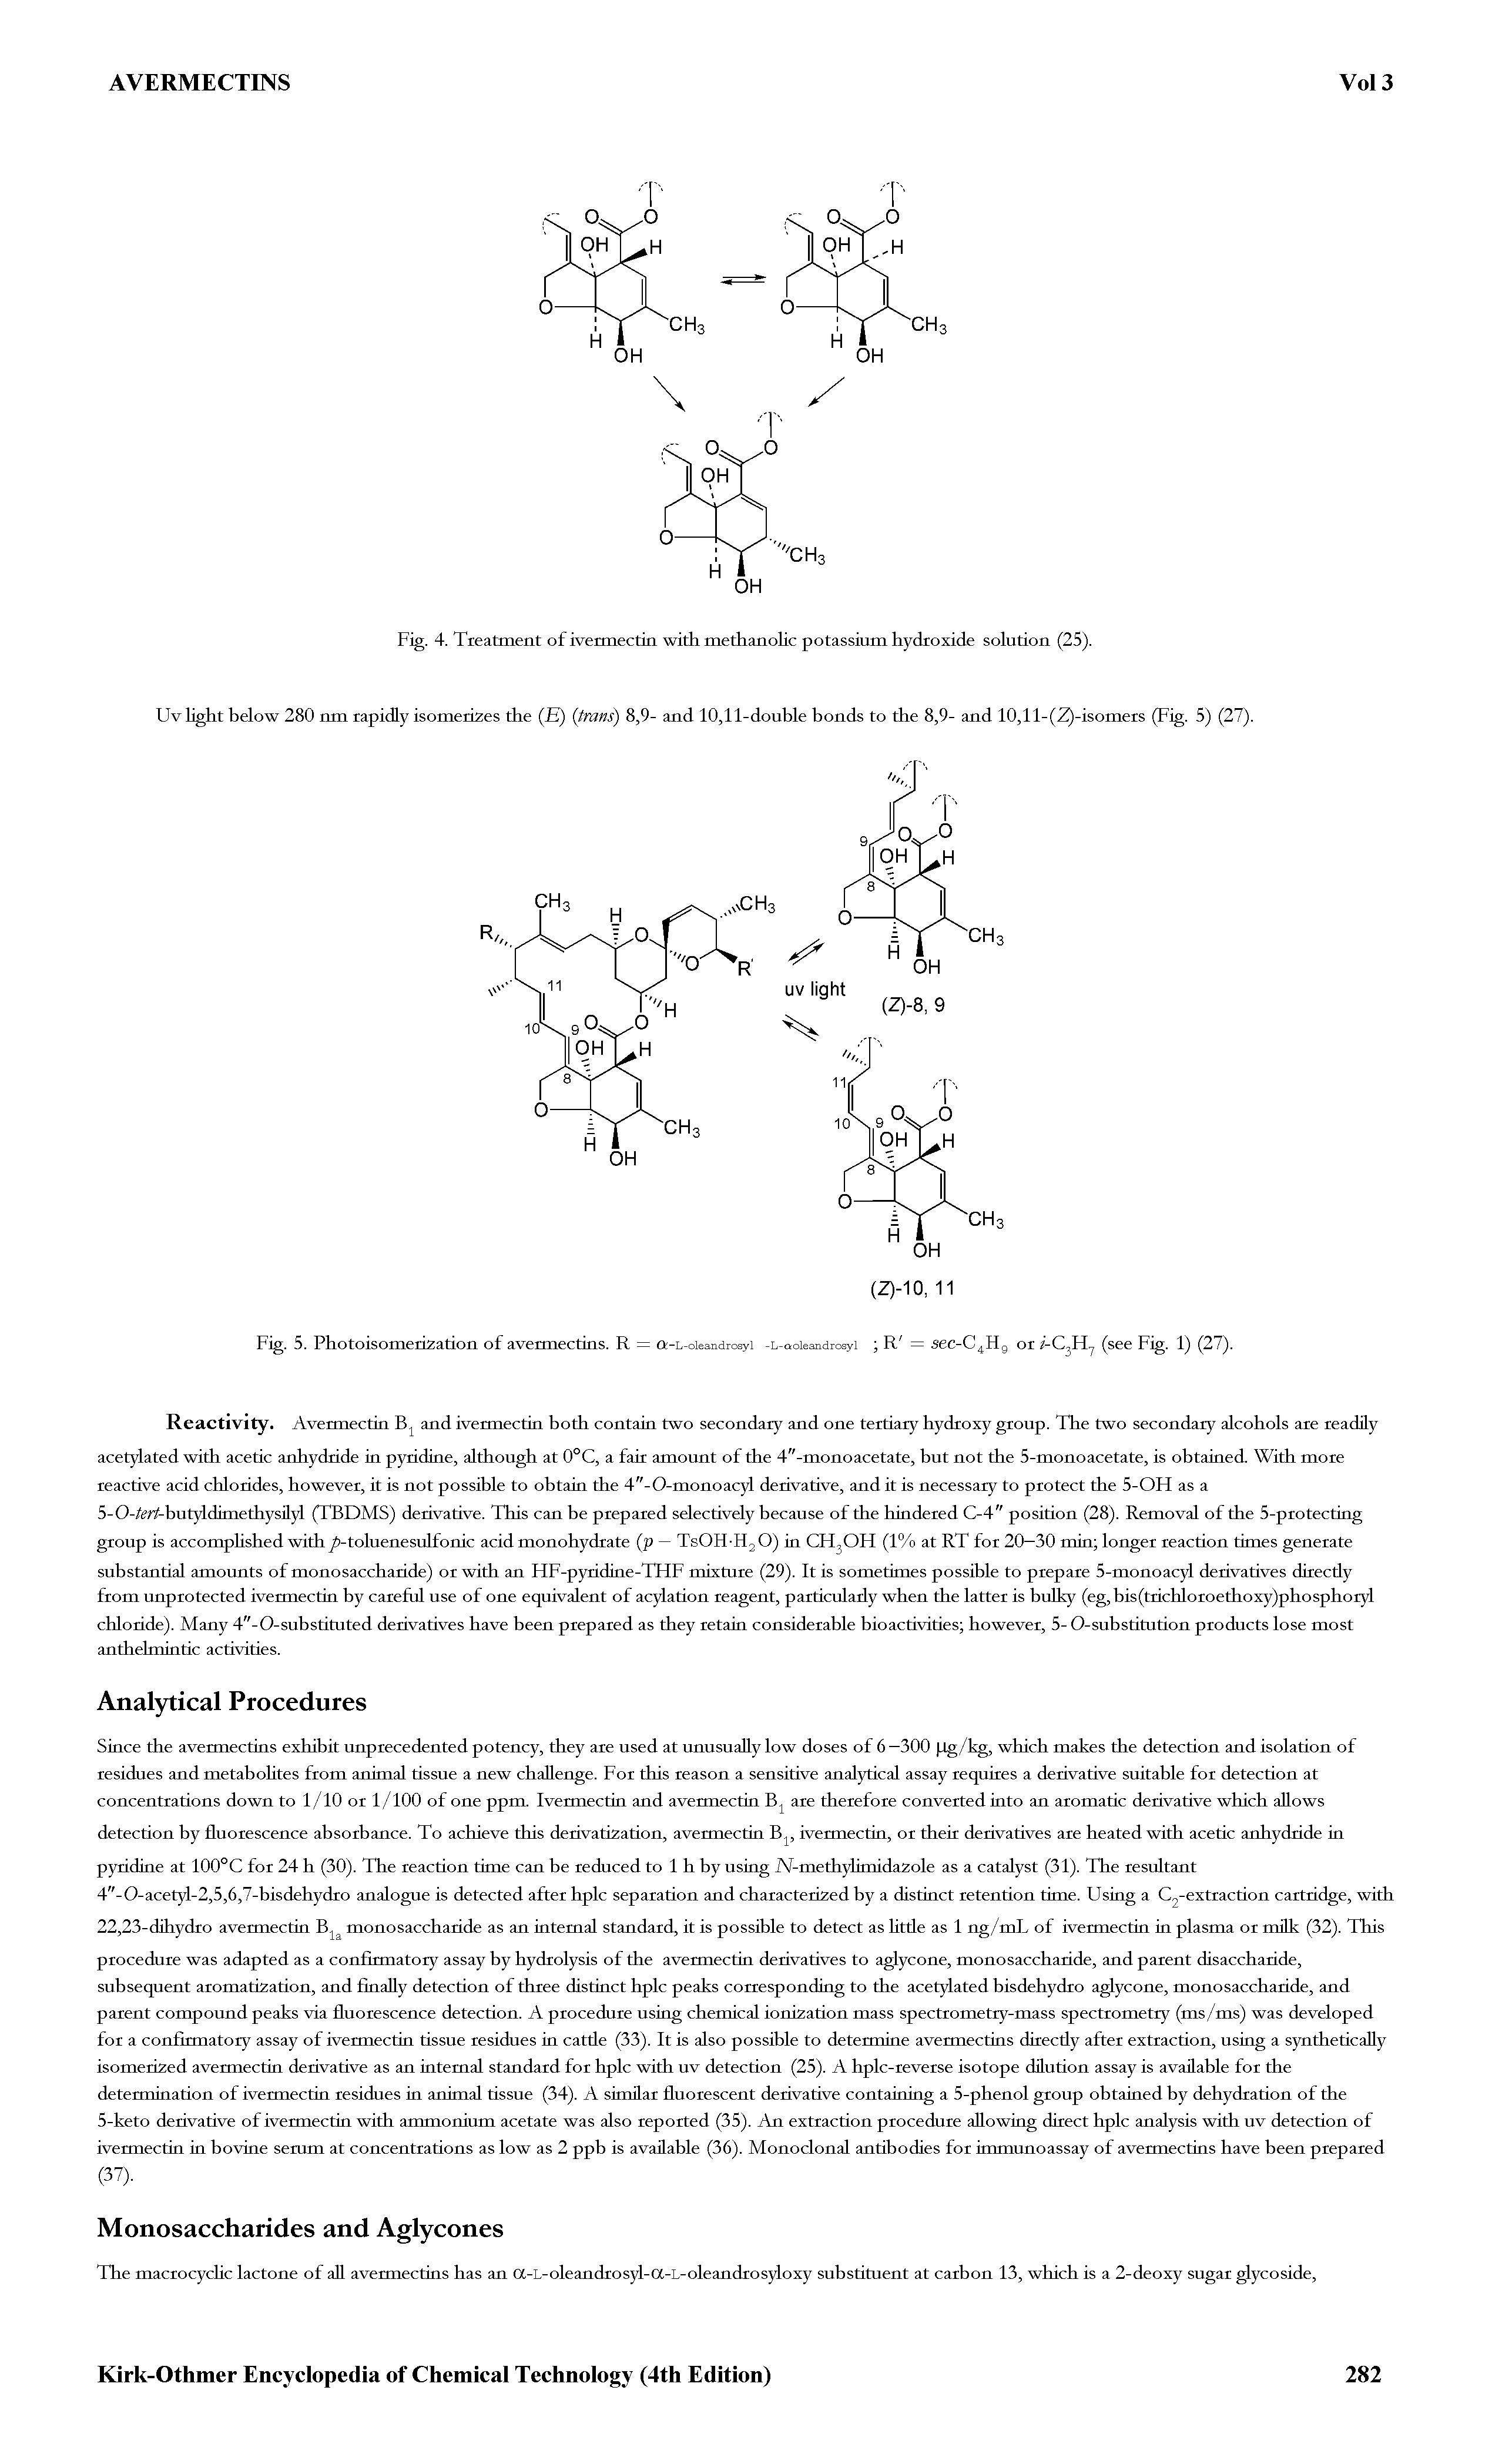 Fig. 4. Treatment of ivermectin with methanolic potassium hydroxide solution (25).